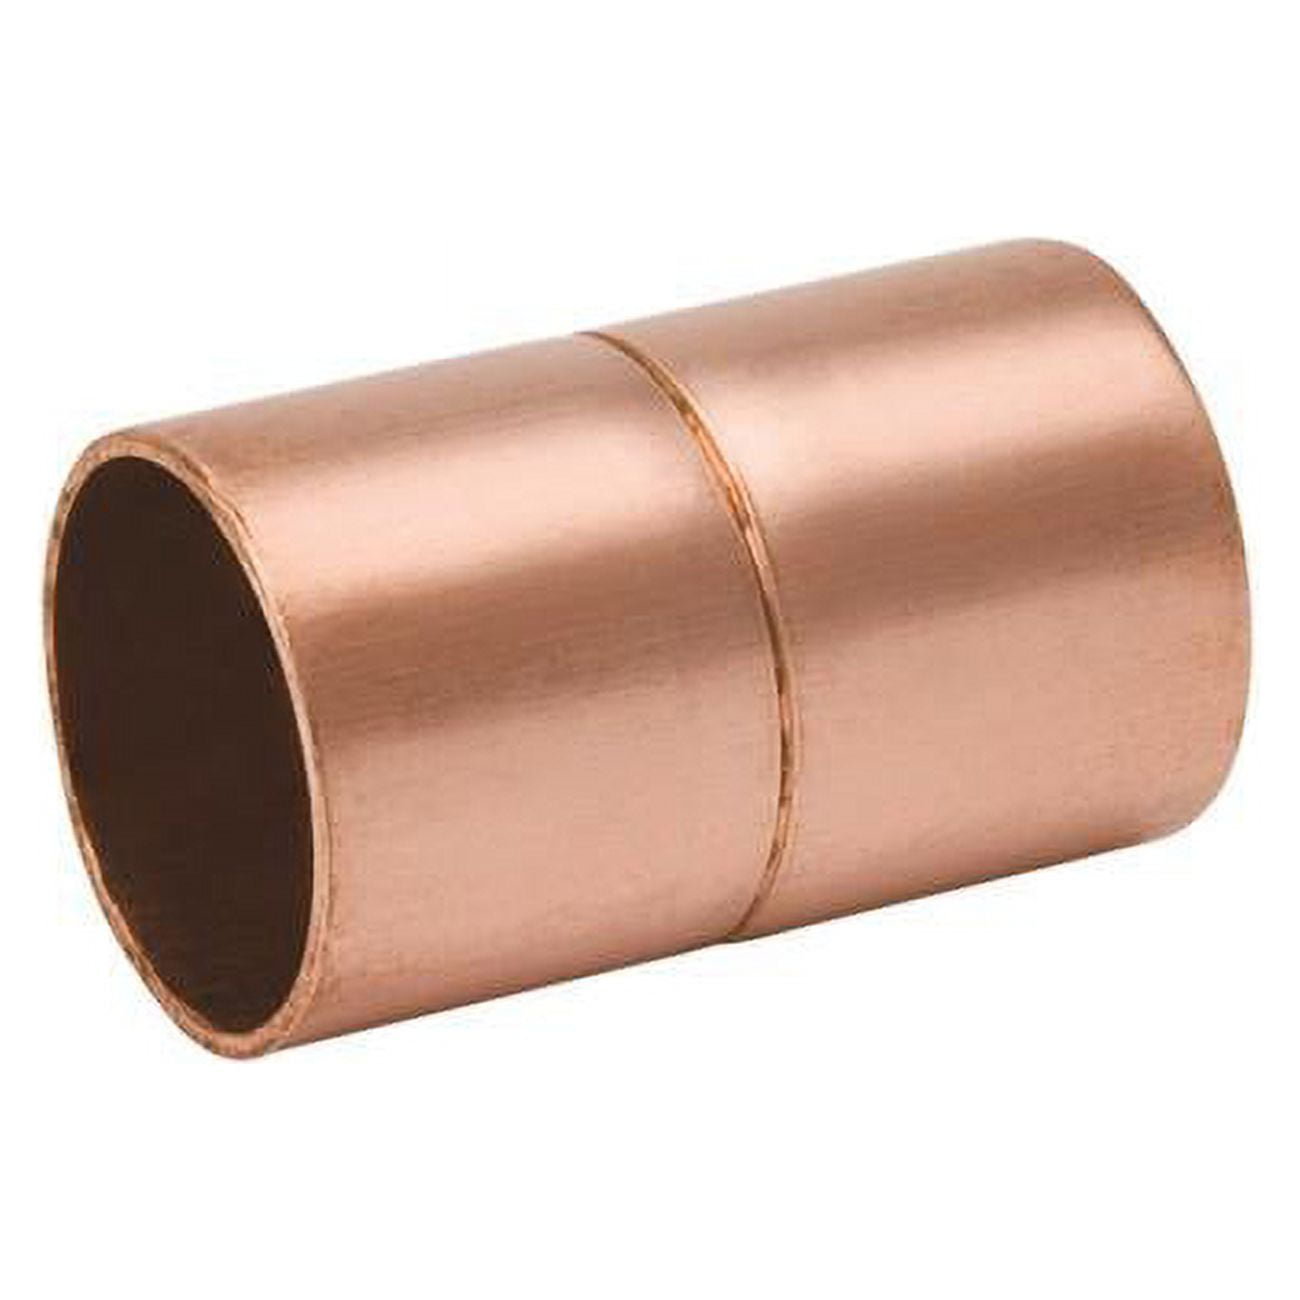 UPC 039923001689 product image for 4062121 Mueller Streamline 0.75 in. Sweat T x 0.75 in. Sweat Copper Coupling wit | upcitemdb.com